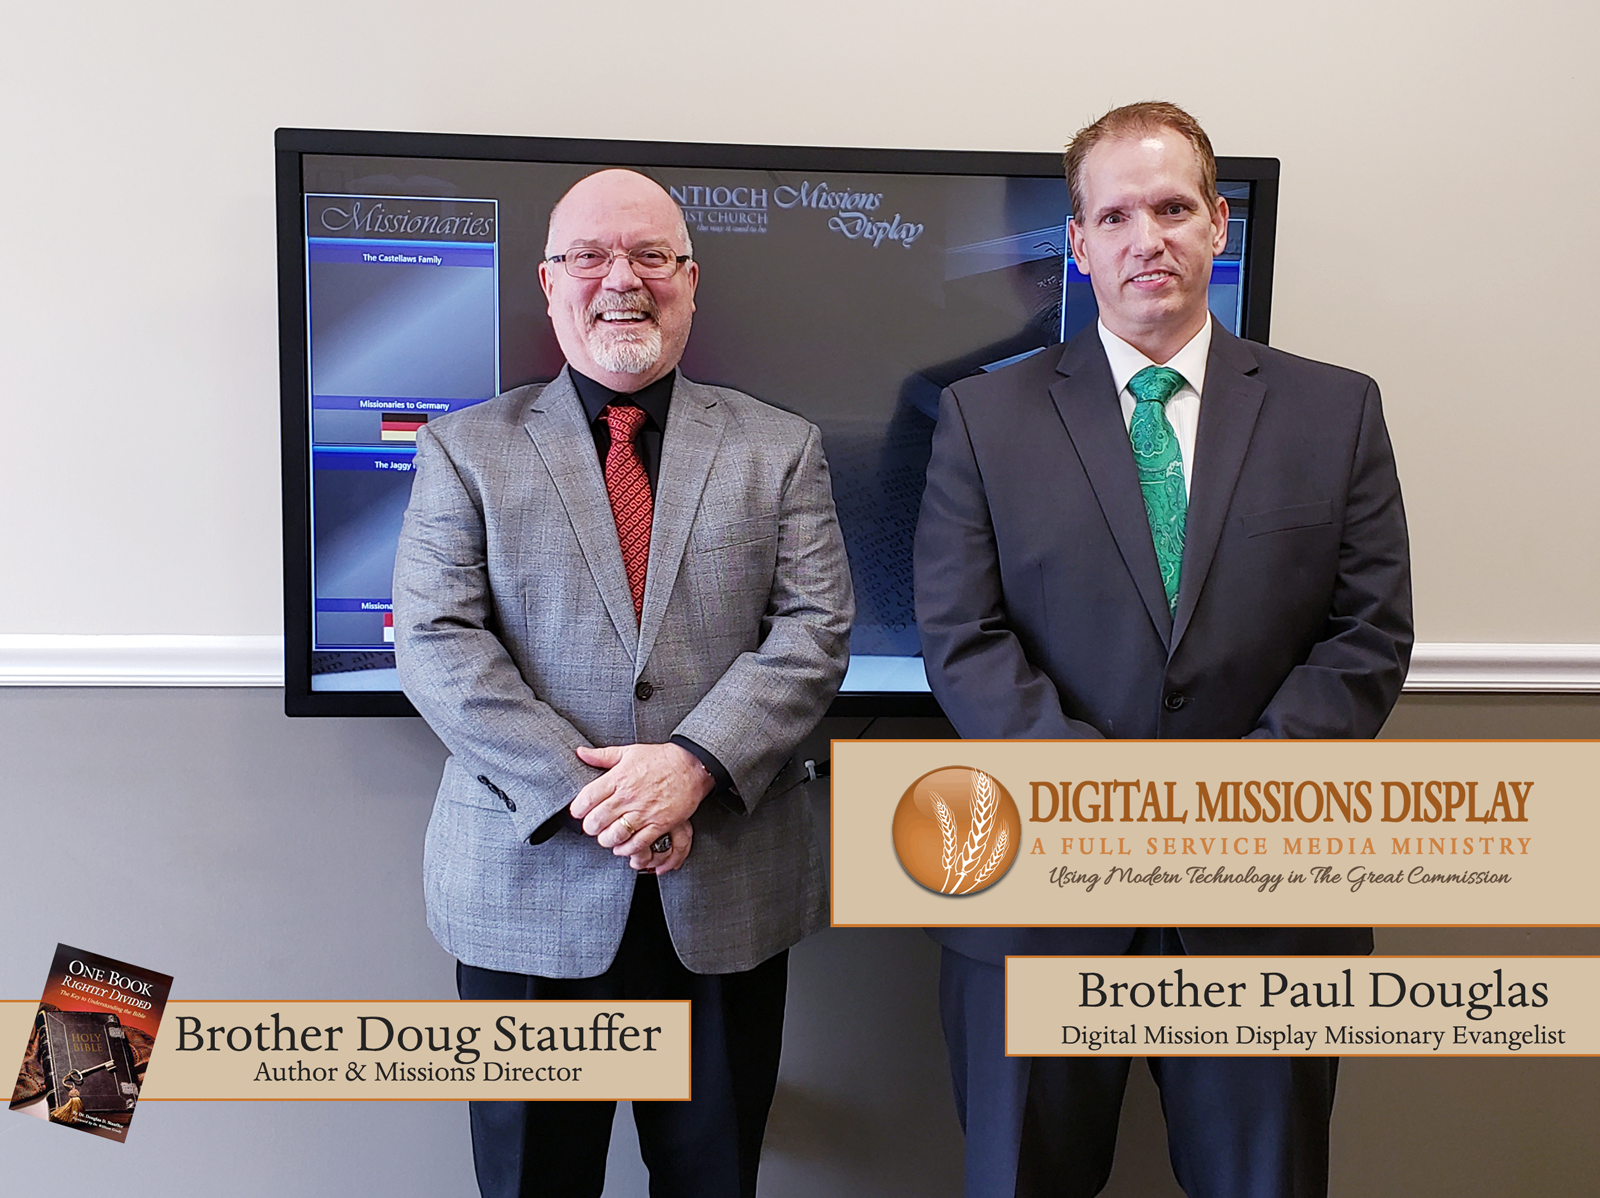 brother doug stauffer and missionary evangelist paul douglas digital mission display antioch baptist church knoxville tenessee image